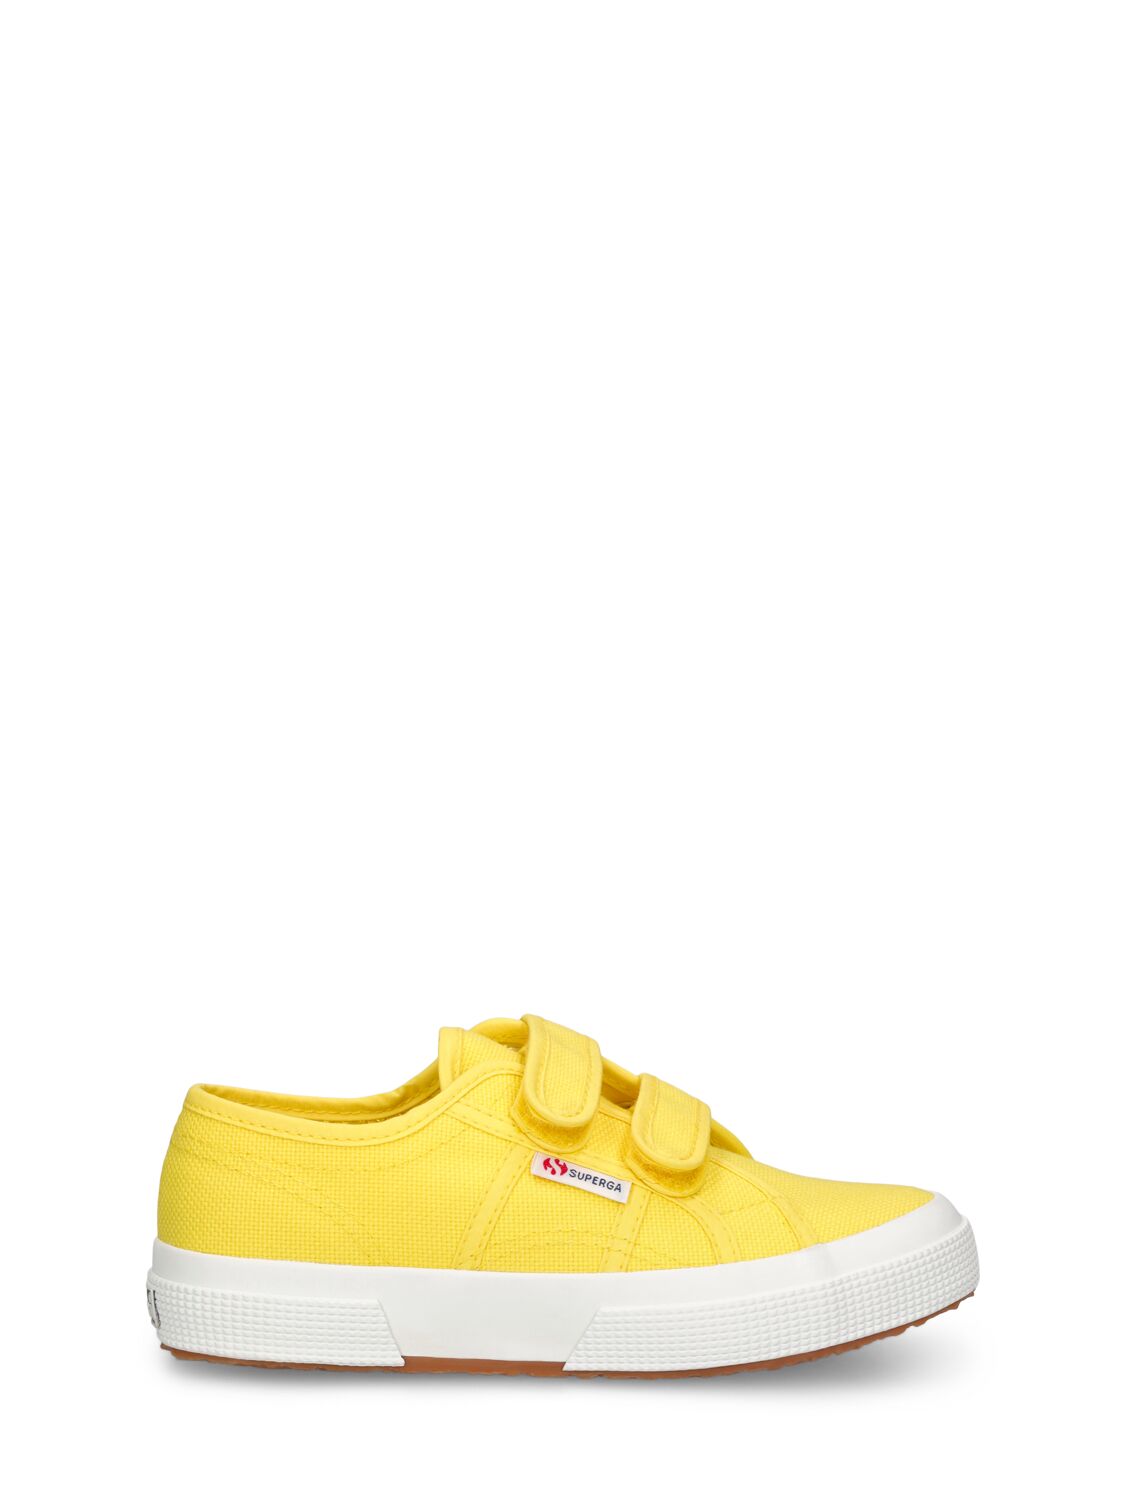 Superga Kids' 2750-cotjstrap Classic Canvas Sneakers In Yellow